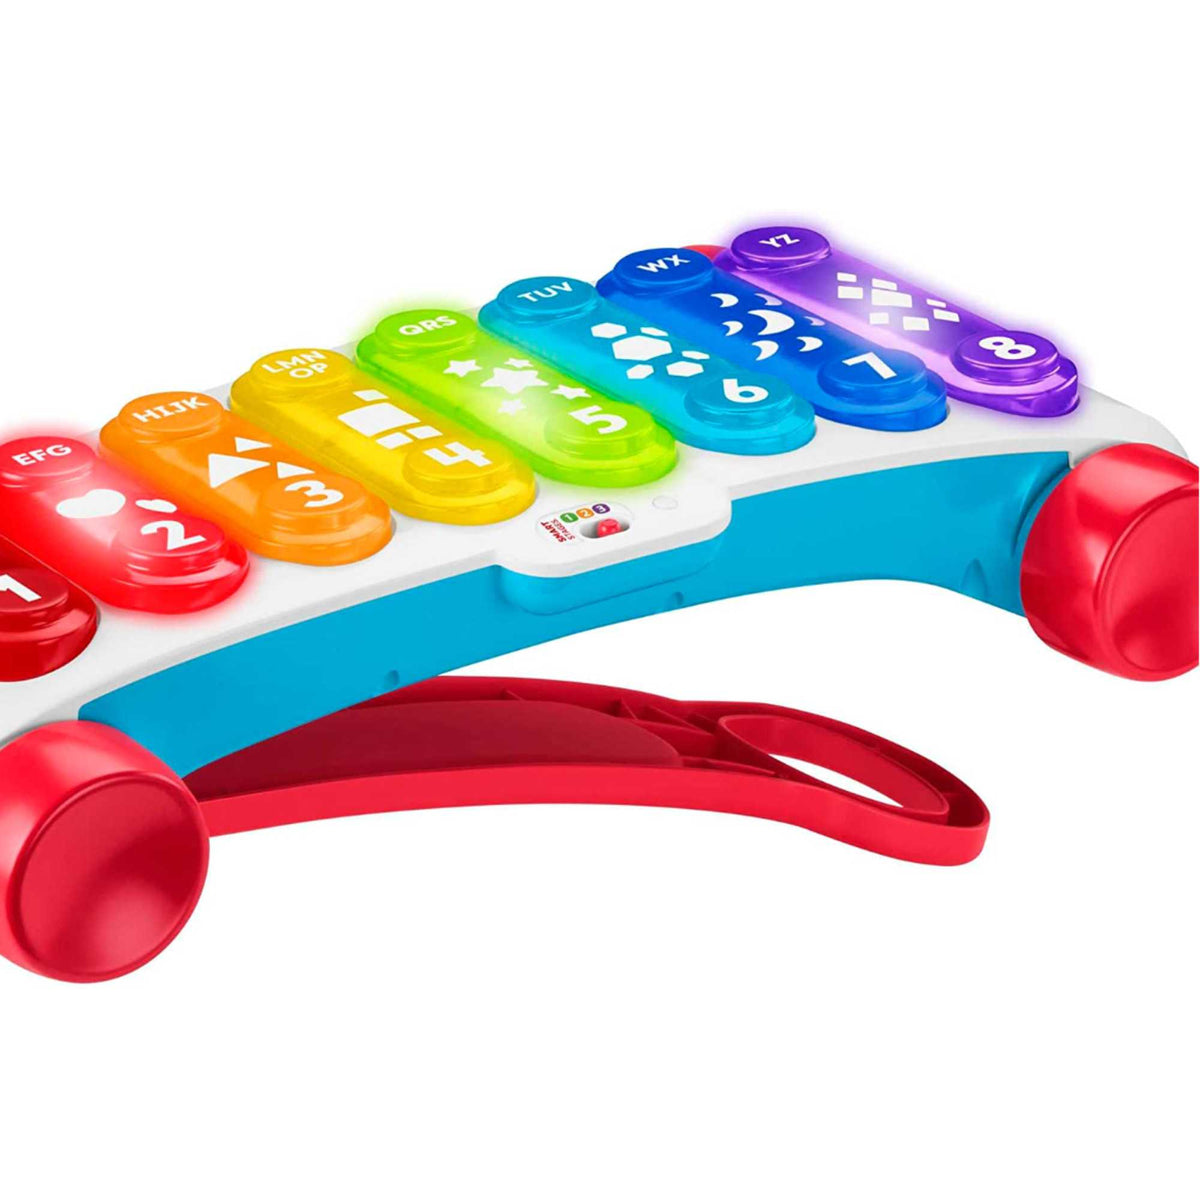 Fisher-Price Giant Light-Up Xylophone Walker Toy